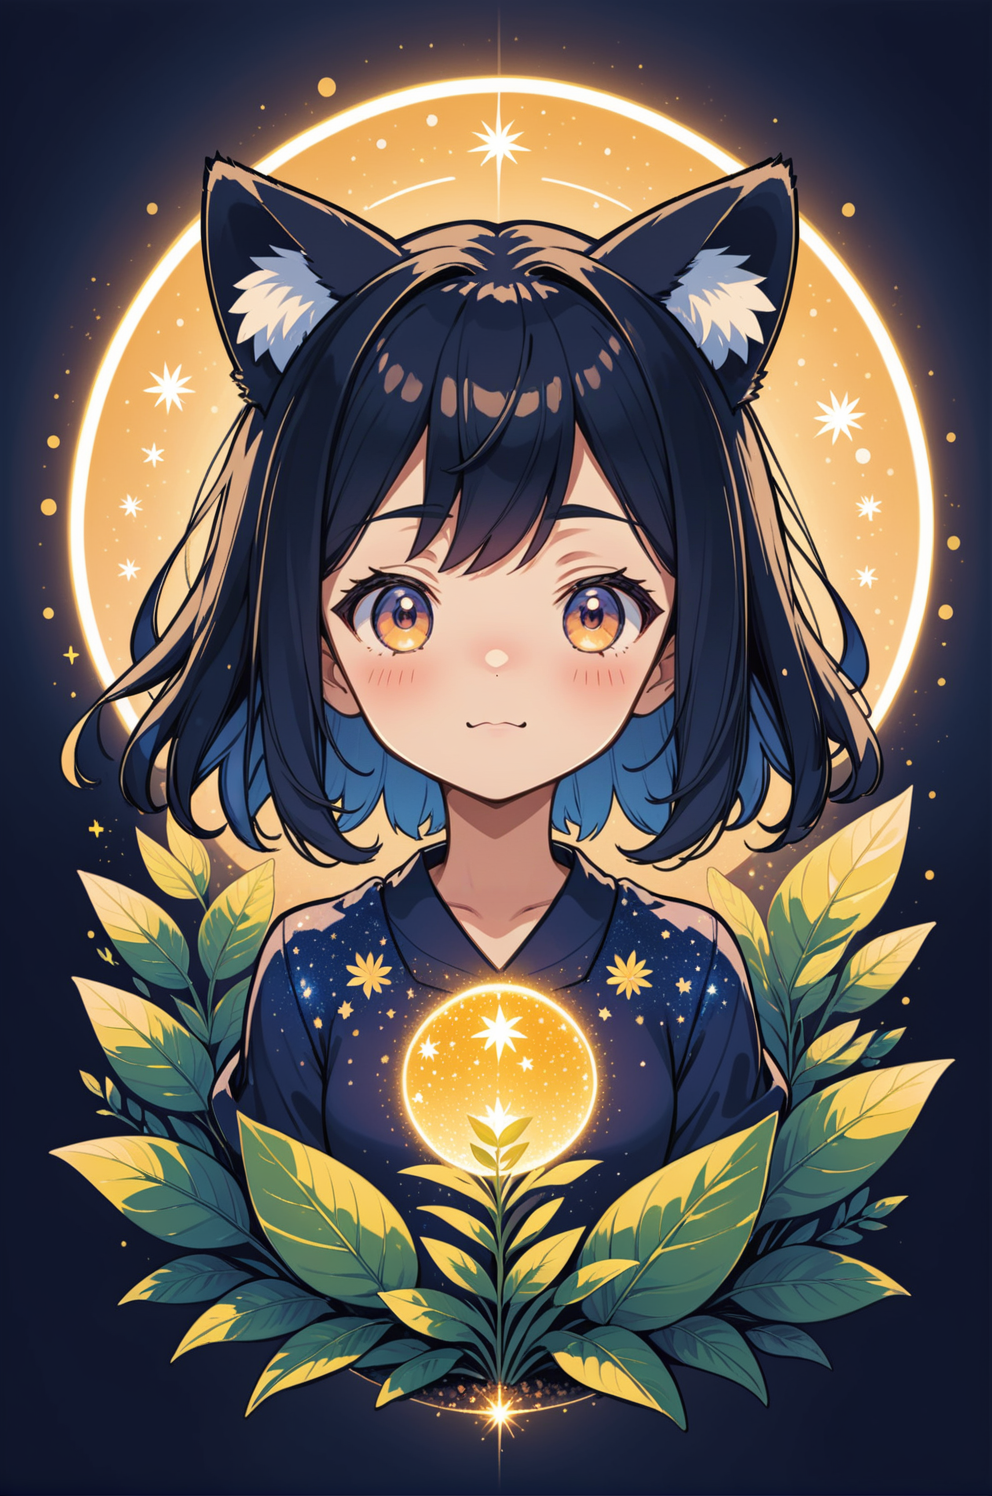 a happy anime girl, logo that says ("Amber Light"), anime, thick outlines, cute style, black hair, plants, sparkles, light...